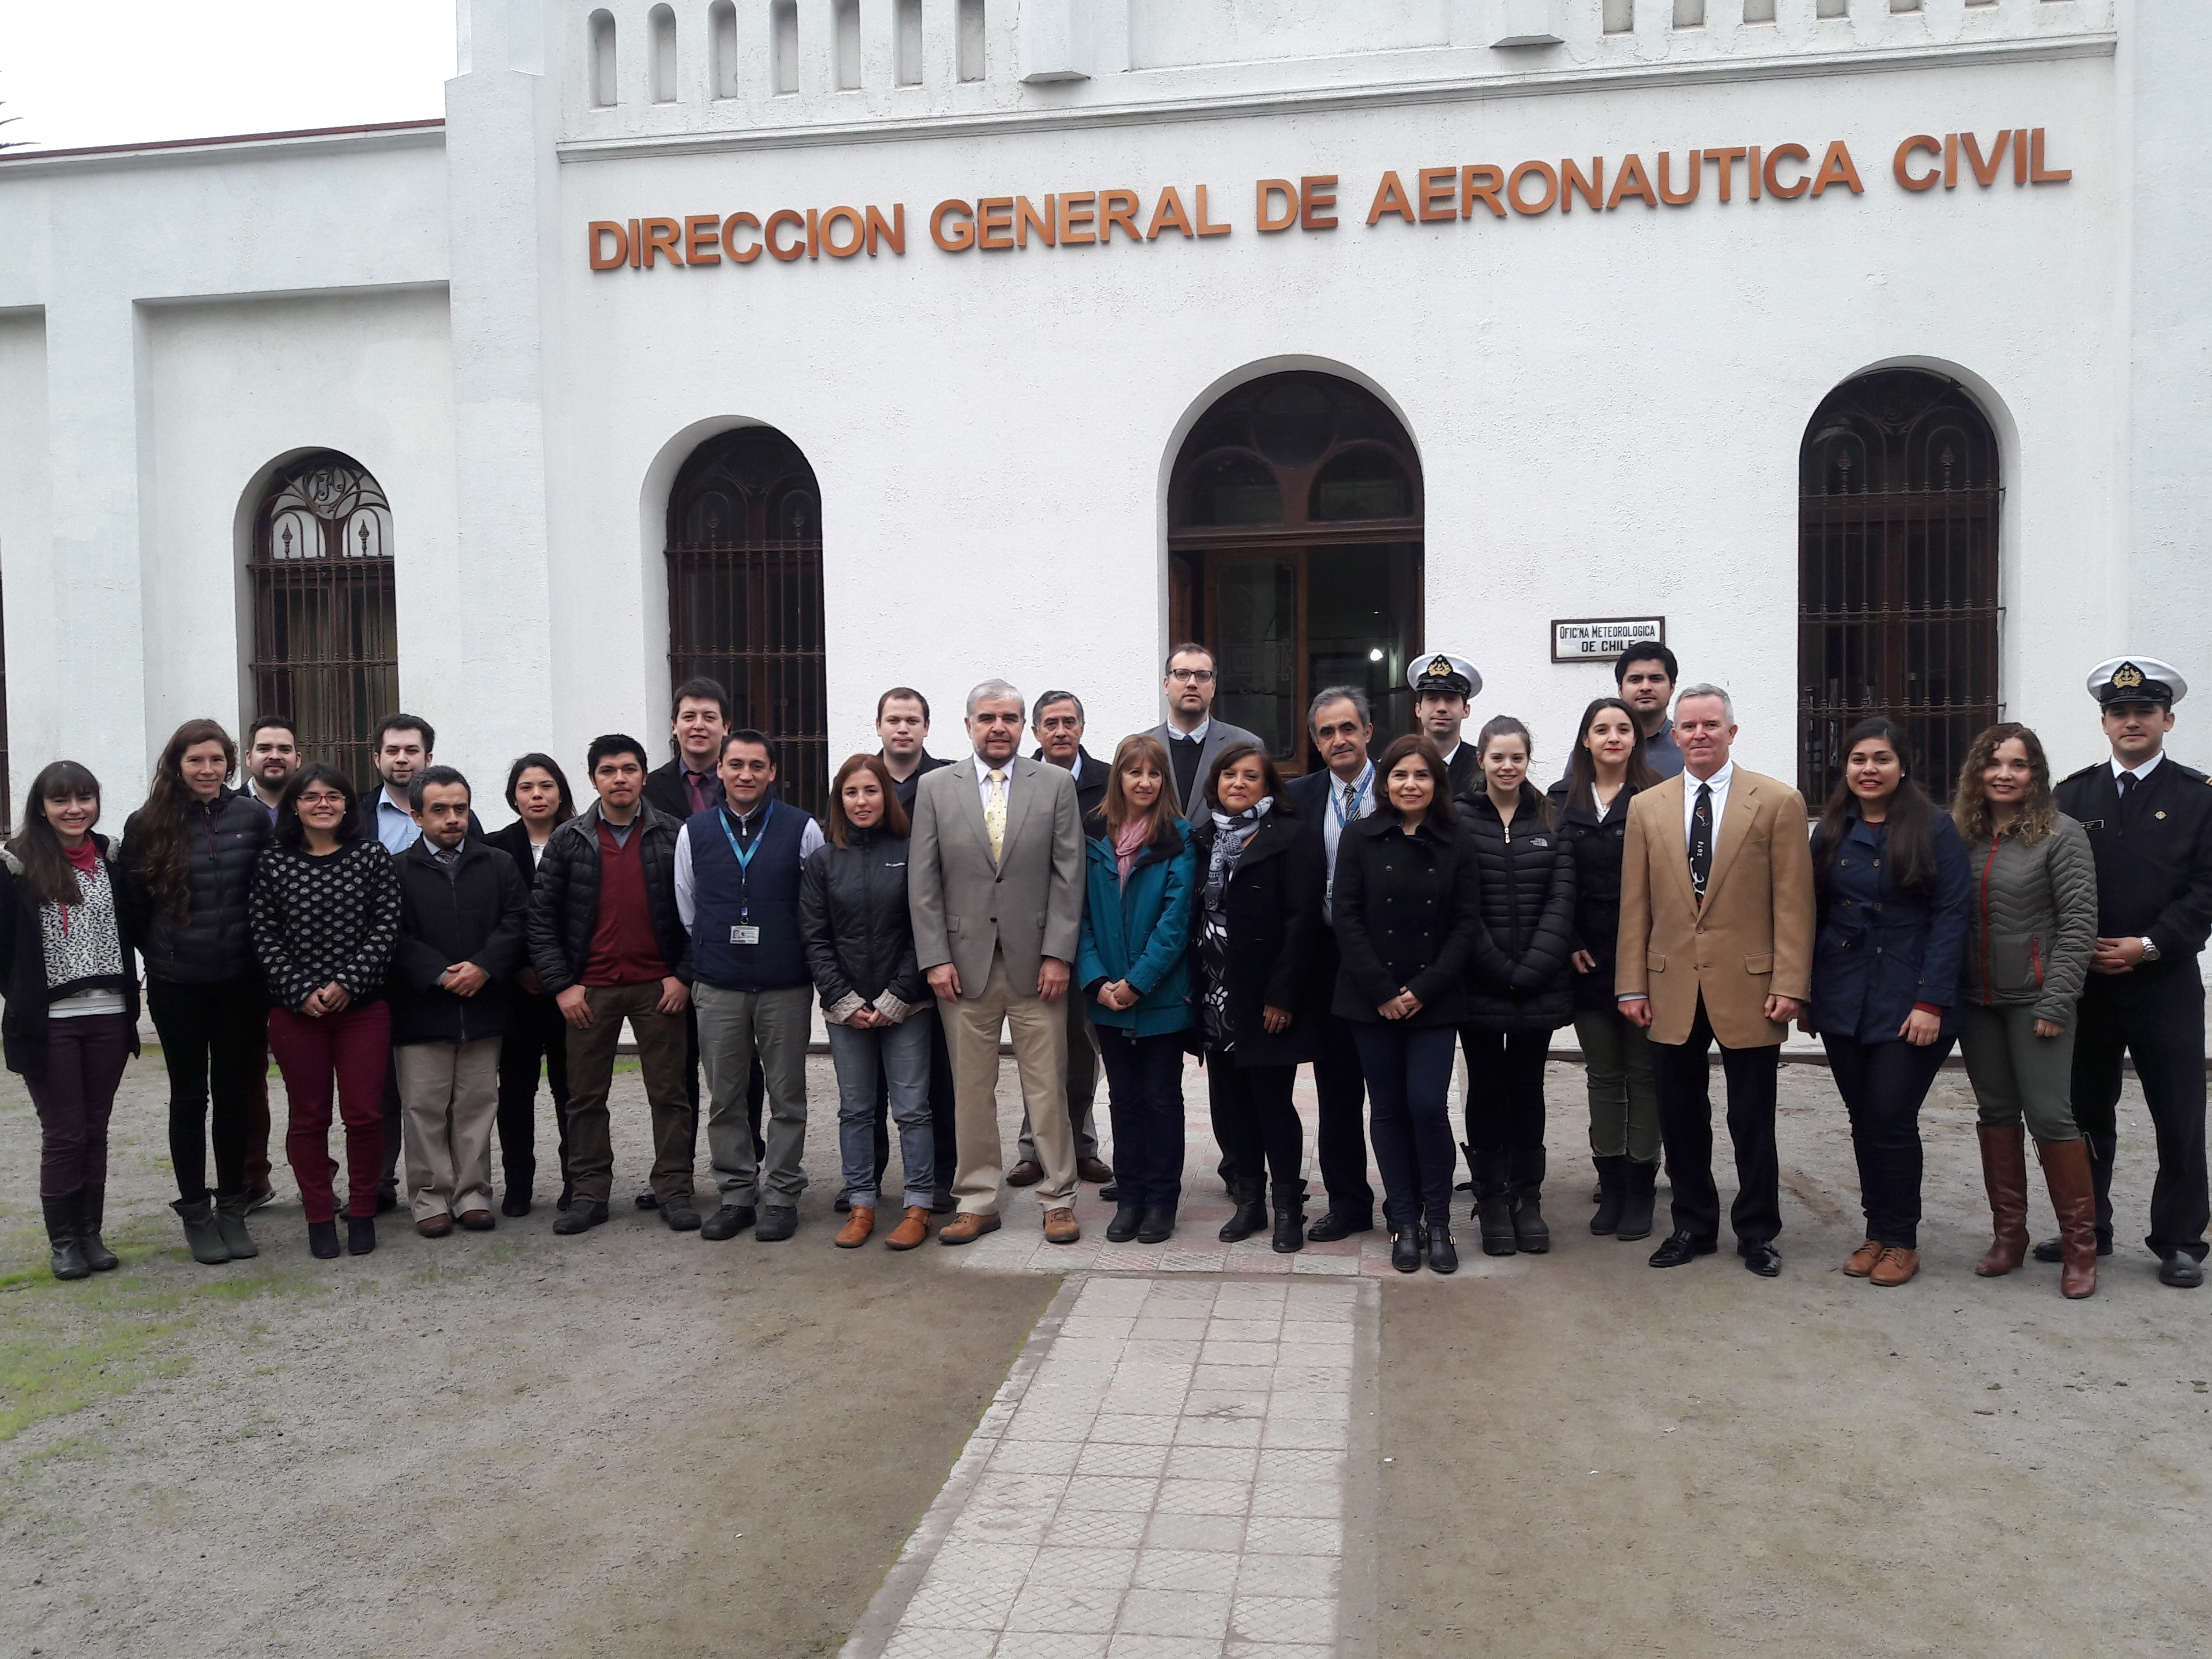 NWP Workshop in Santiago, Chile (May 16-20, 2016)